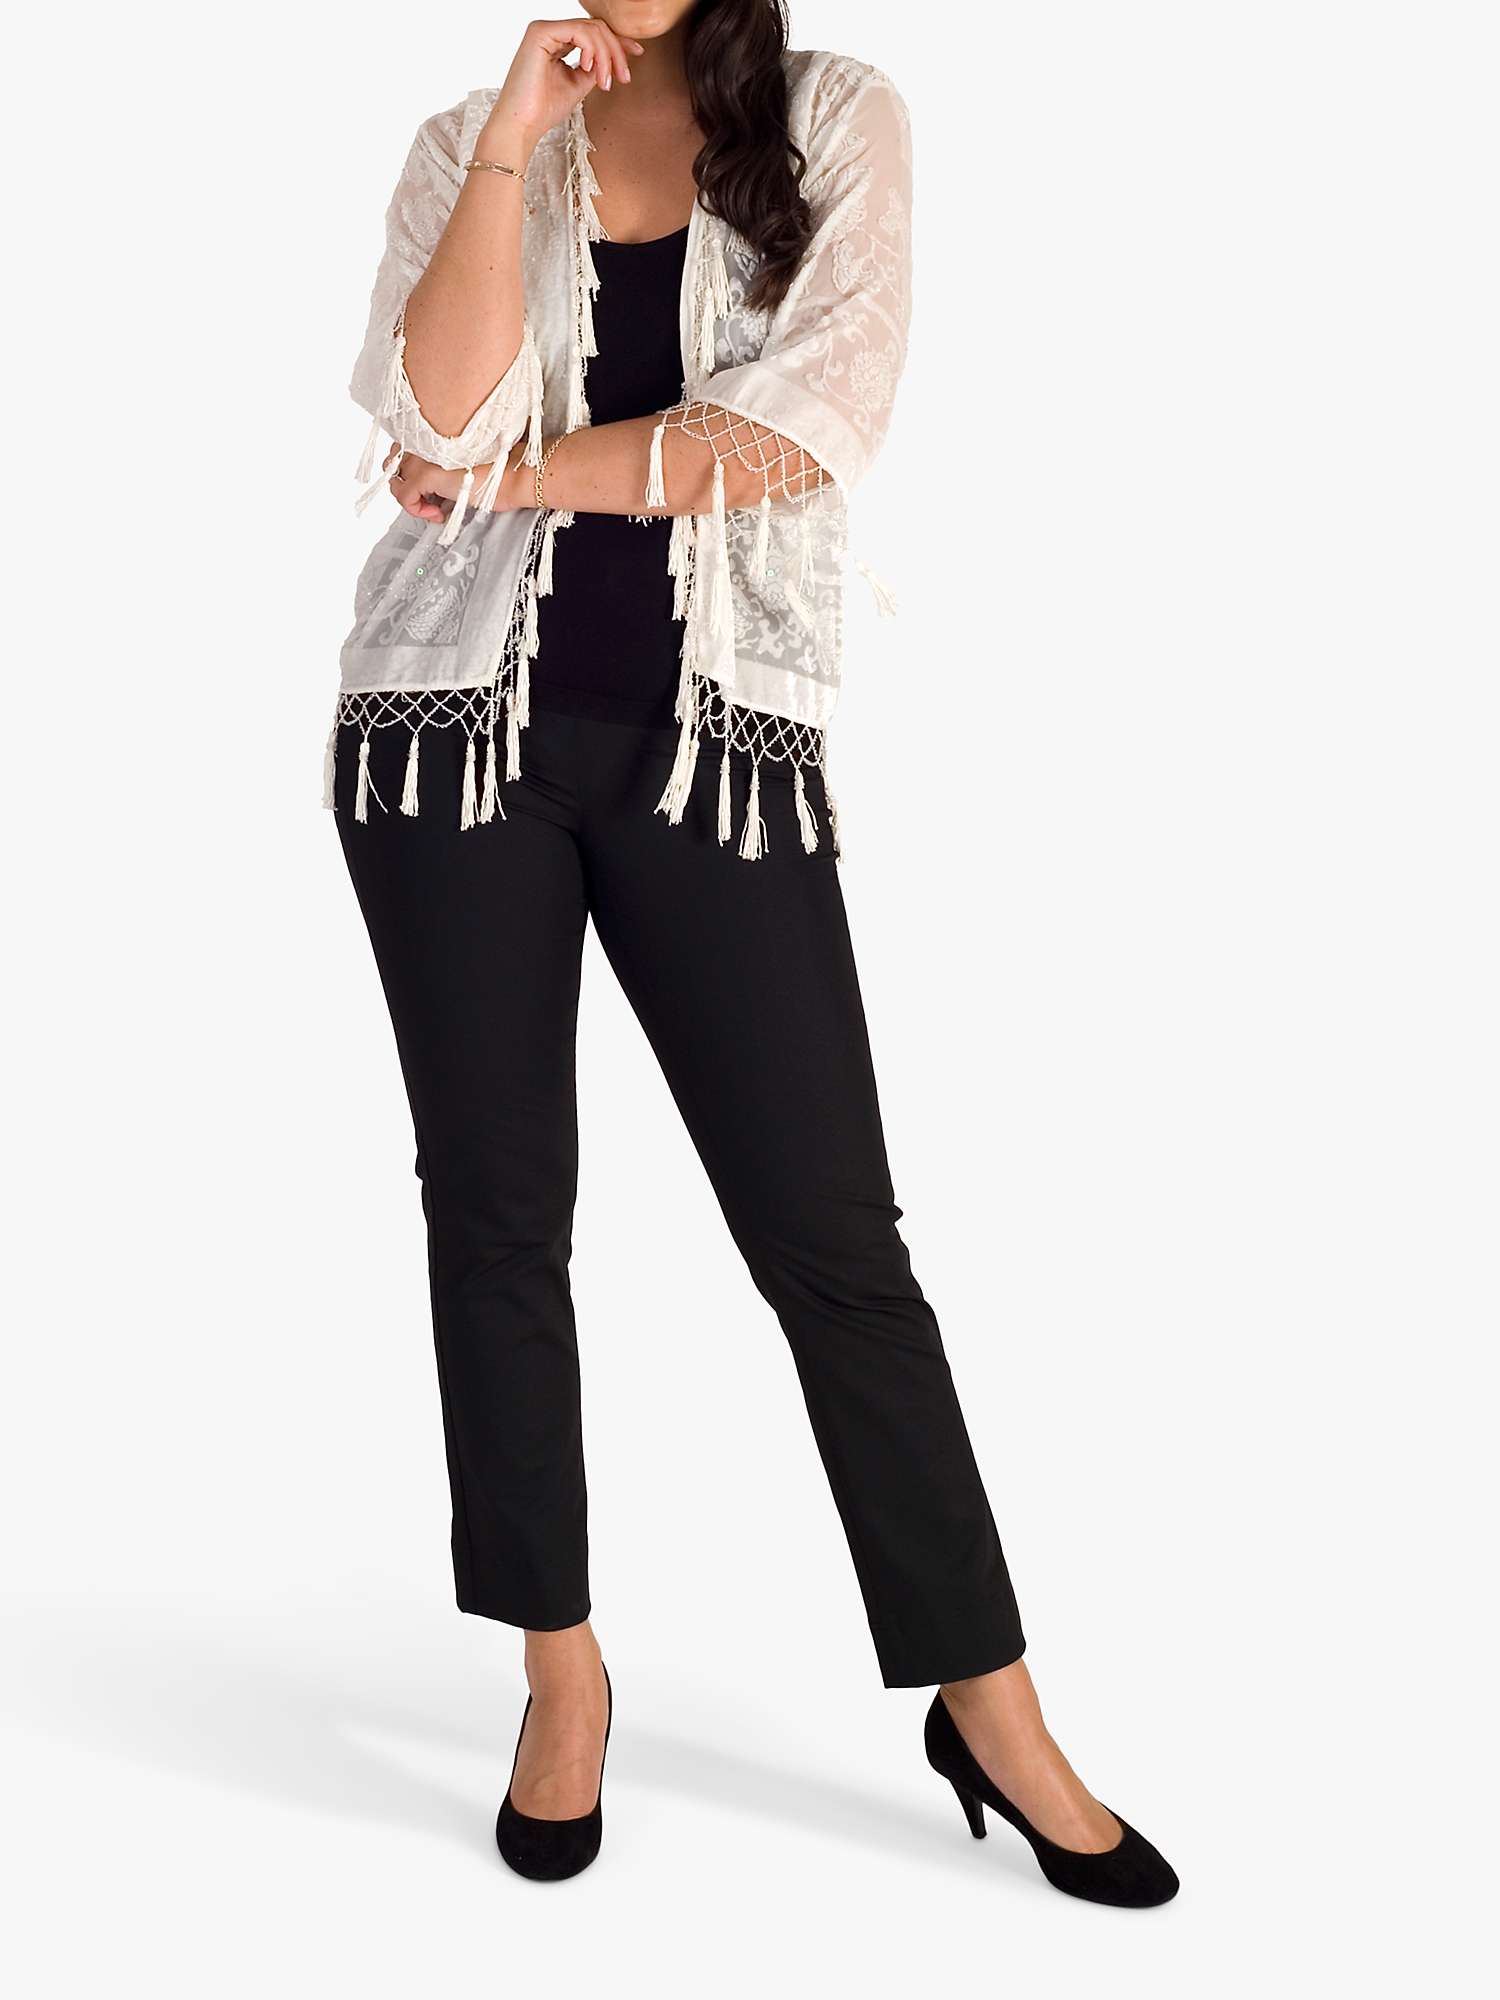 Buy chesca Bead Embellished Tassel Trim Coverup, White Online at johnlewis.com